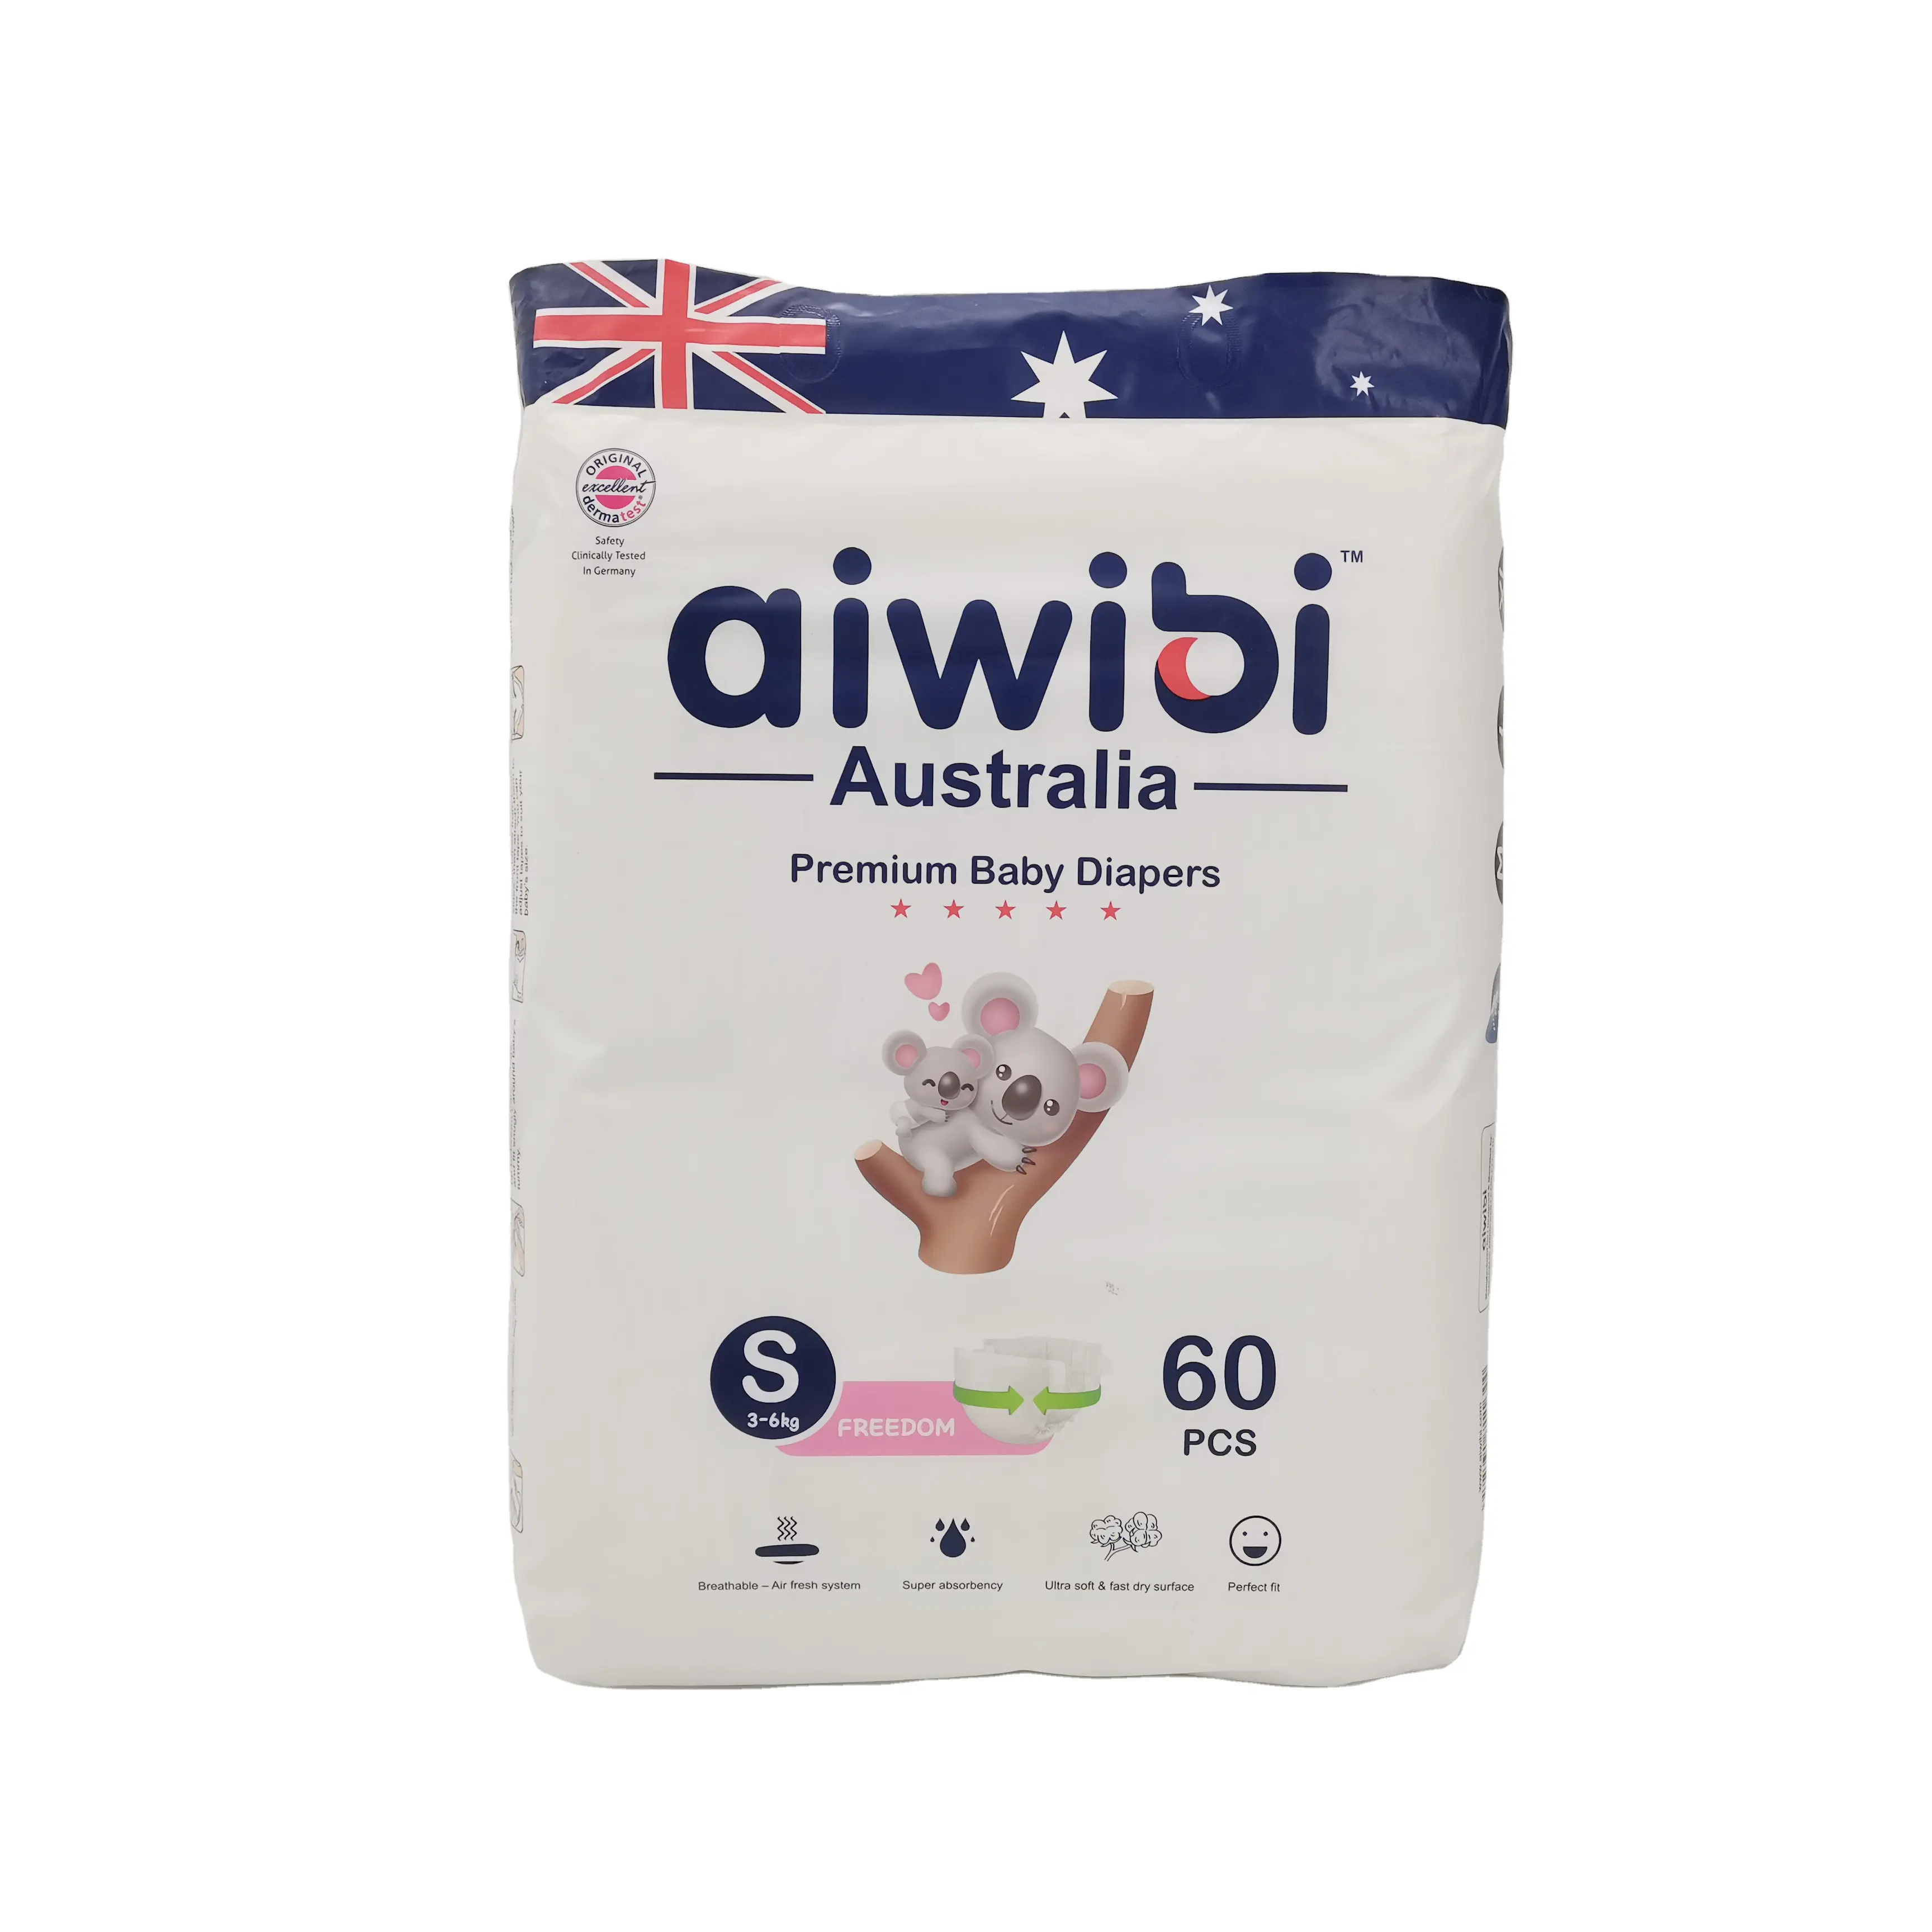 AIWIBI Australia brand premium high quality diapers super soft skin friendly ultra thin diapers baby diapers for sensitive skin